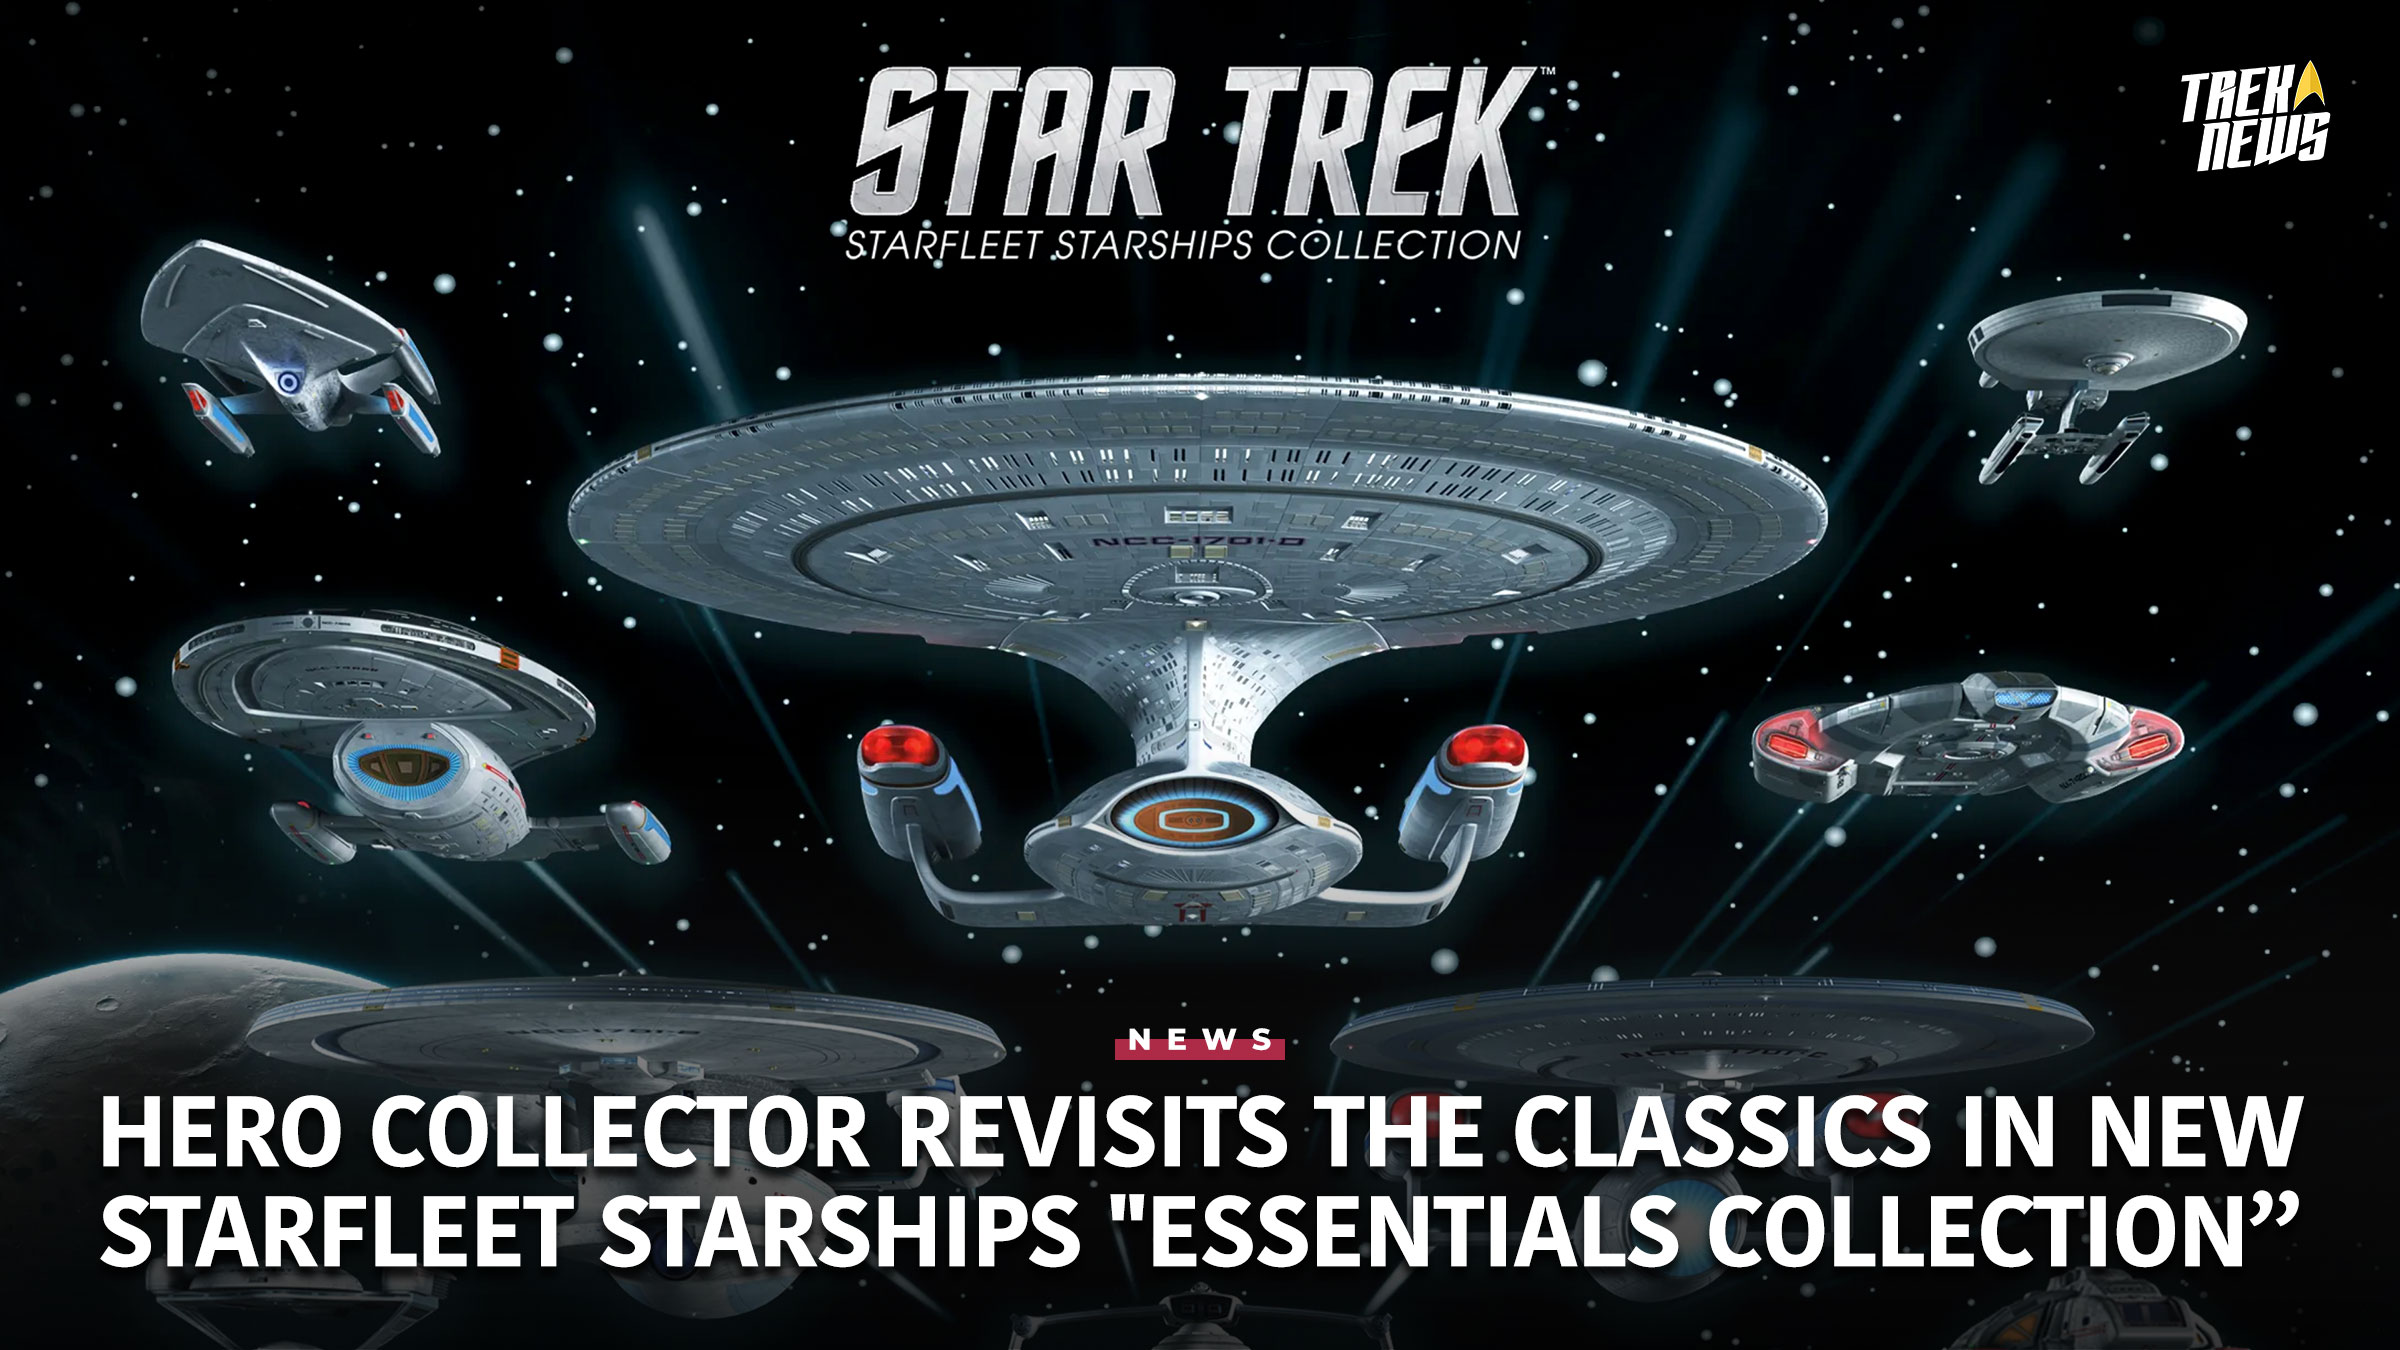 Hero Collector Revisits The Classics In New Starfleet Starships “Essentials” Collection